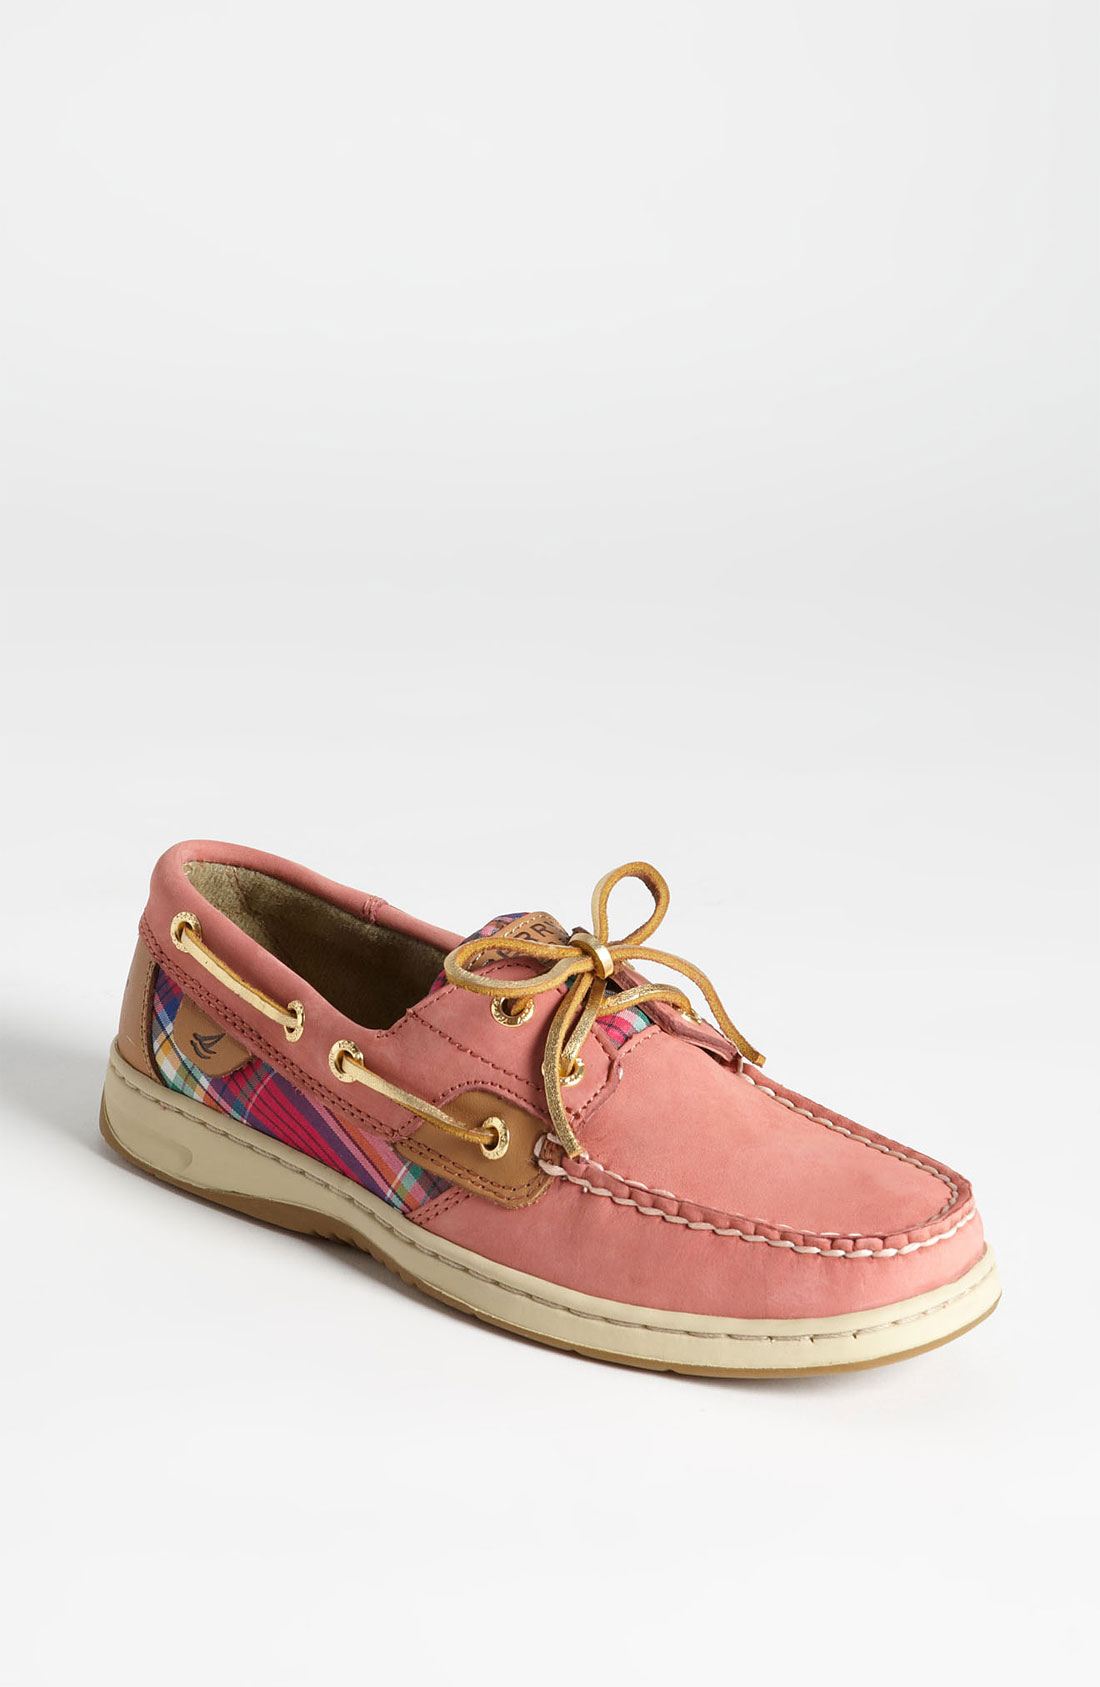 sperry top sider clearance